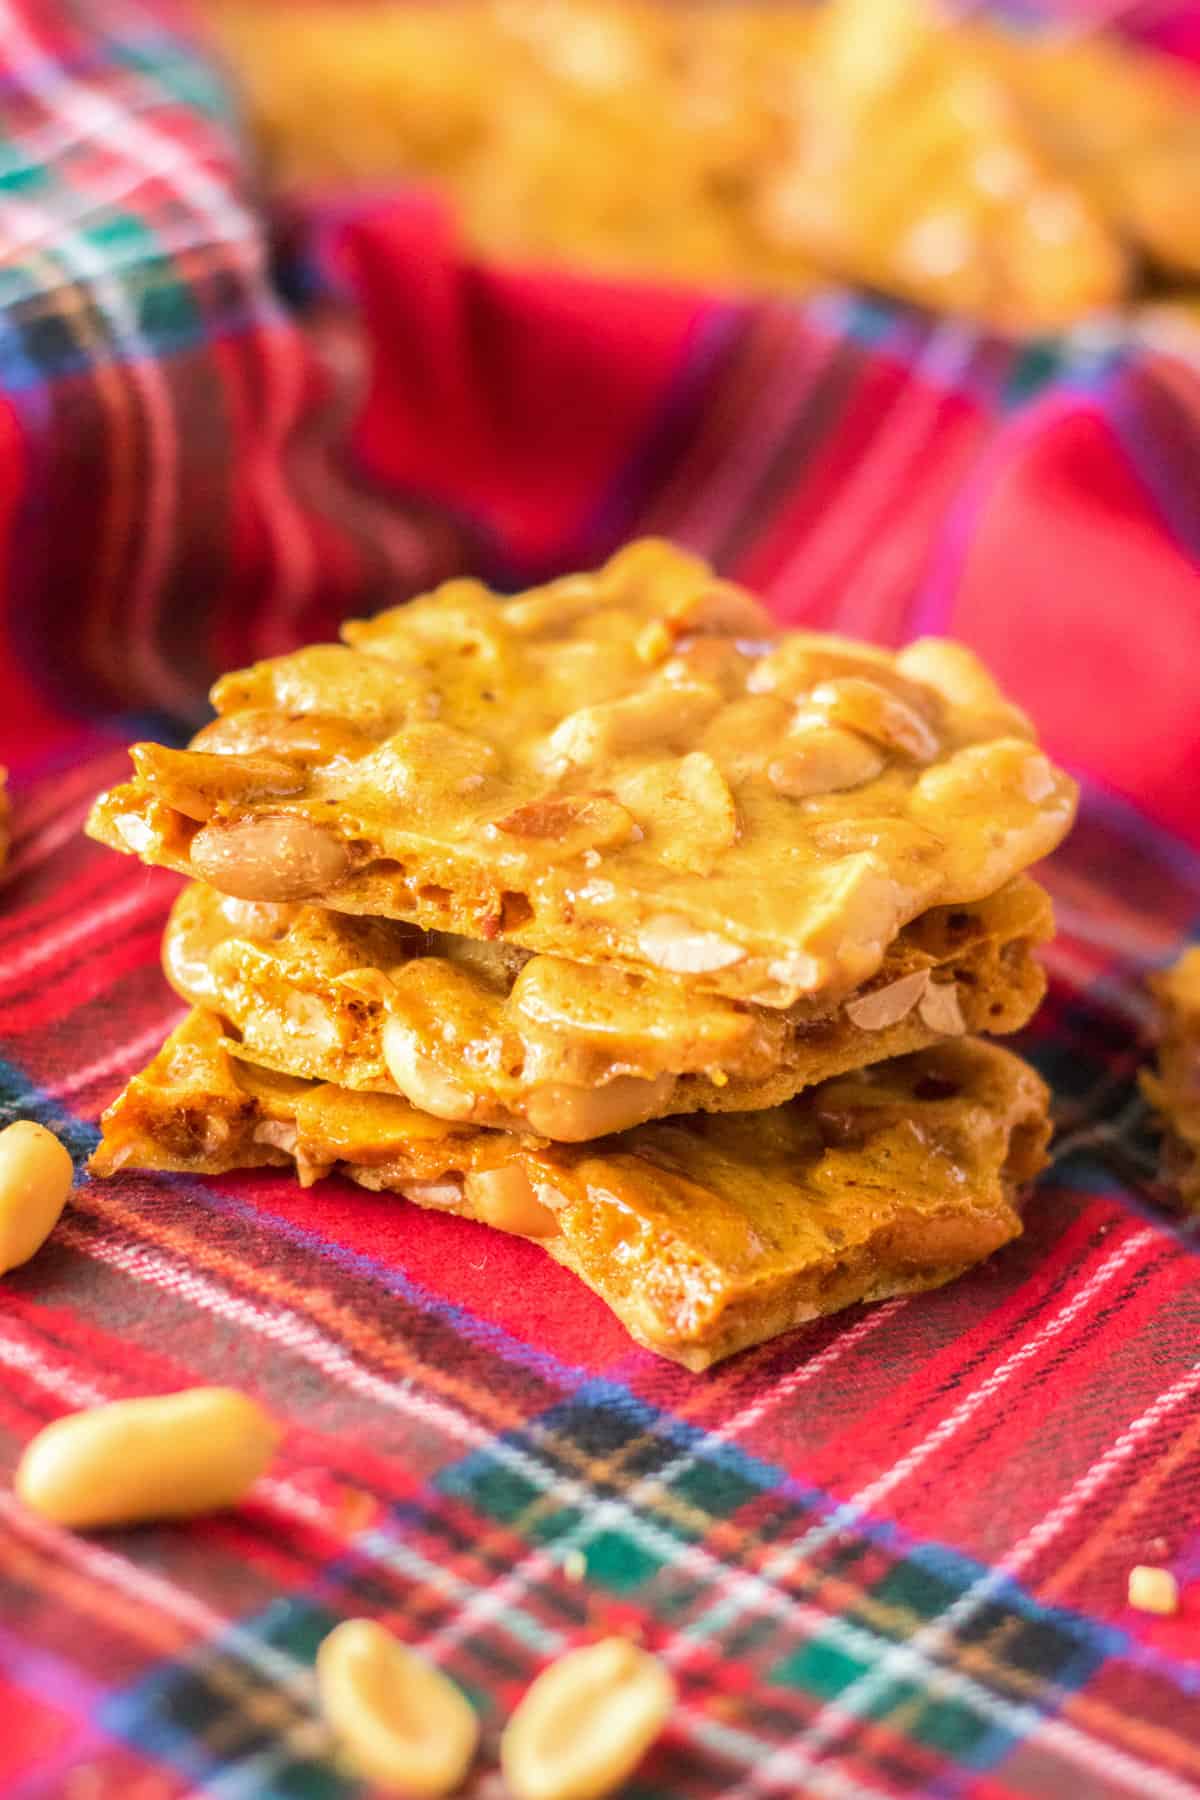 Pieces of peanut brittle stacked on top of one another with roasted peanuts sprinkled around them.